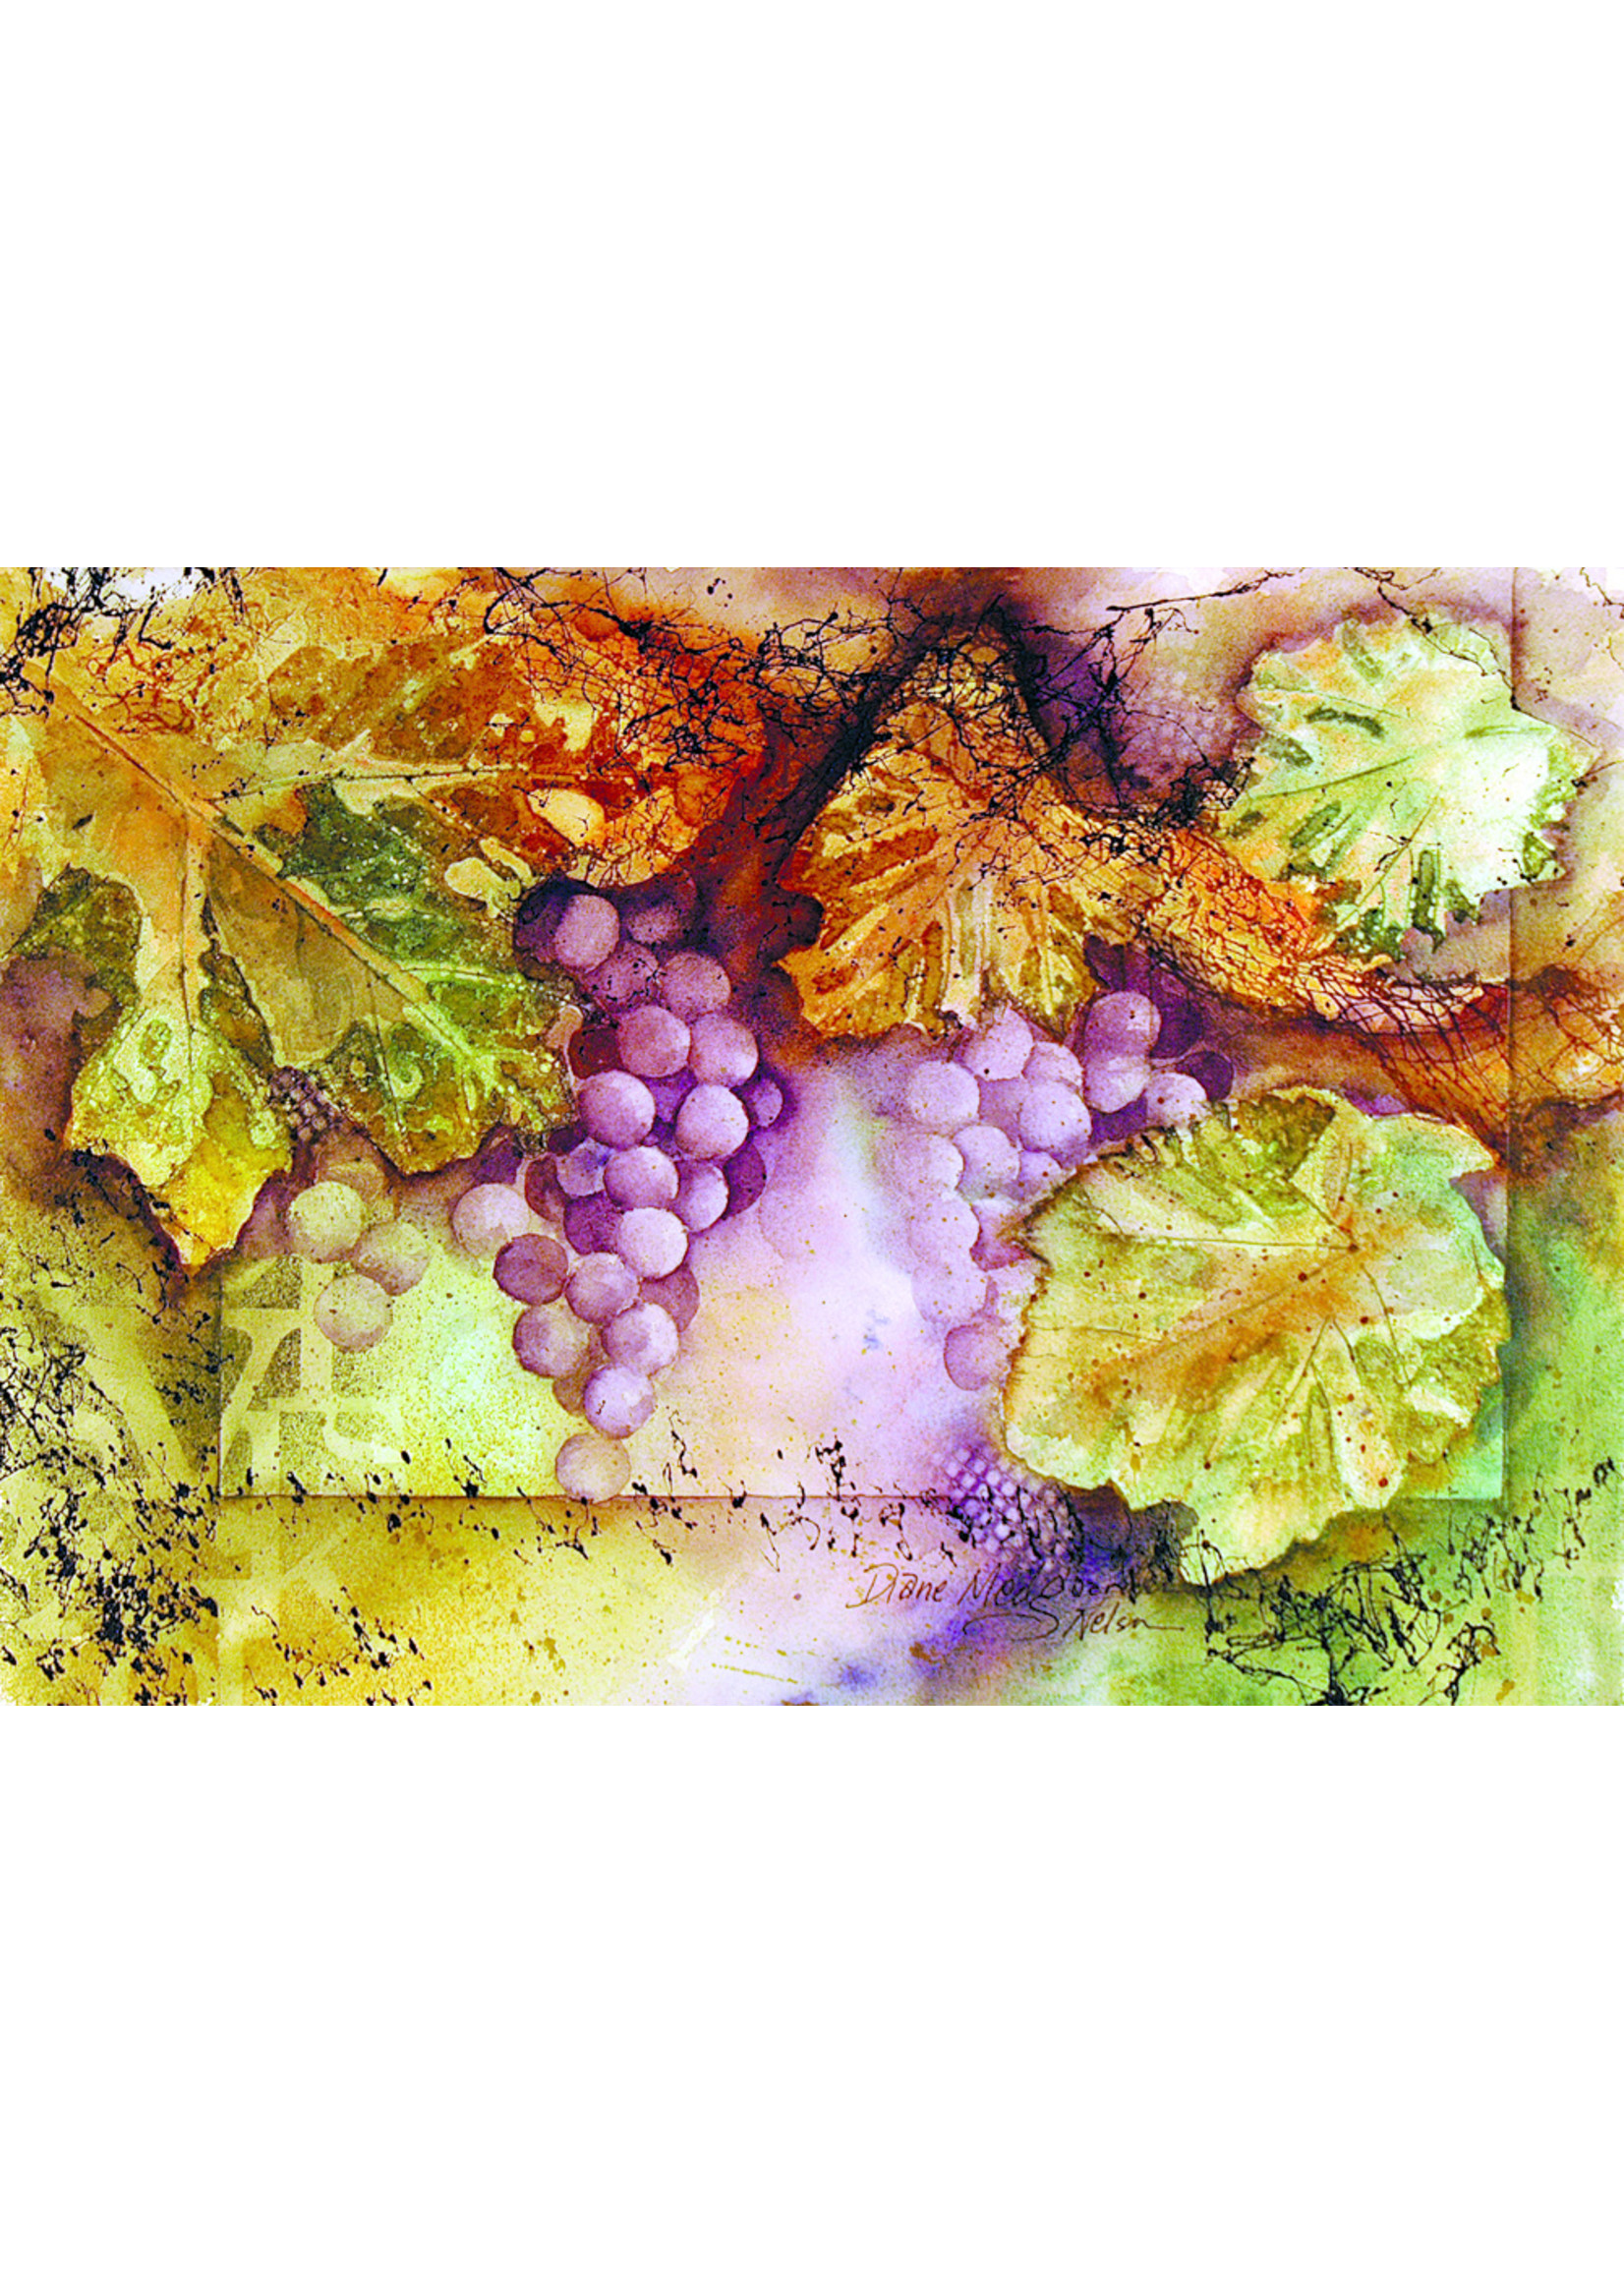 Grapes Watercolor Note Cards by Diane Medgaarden Nelson